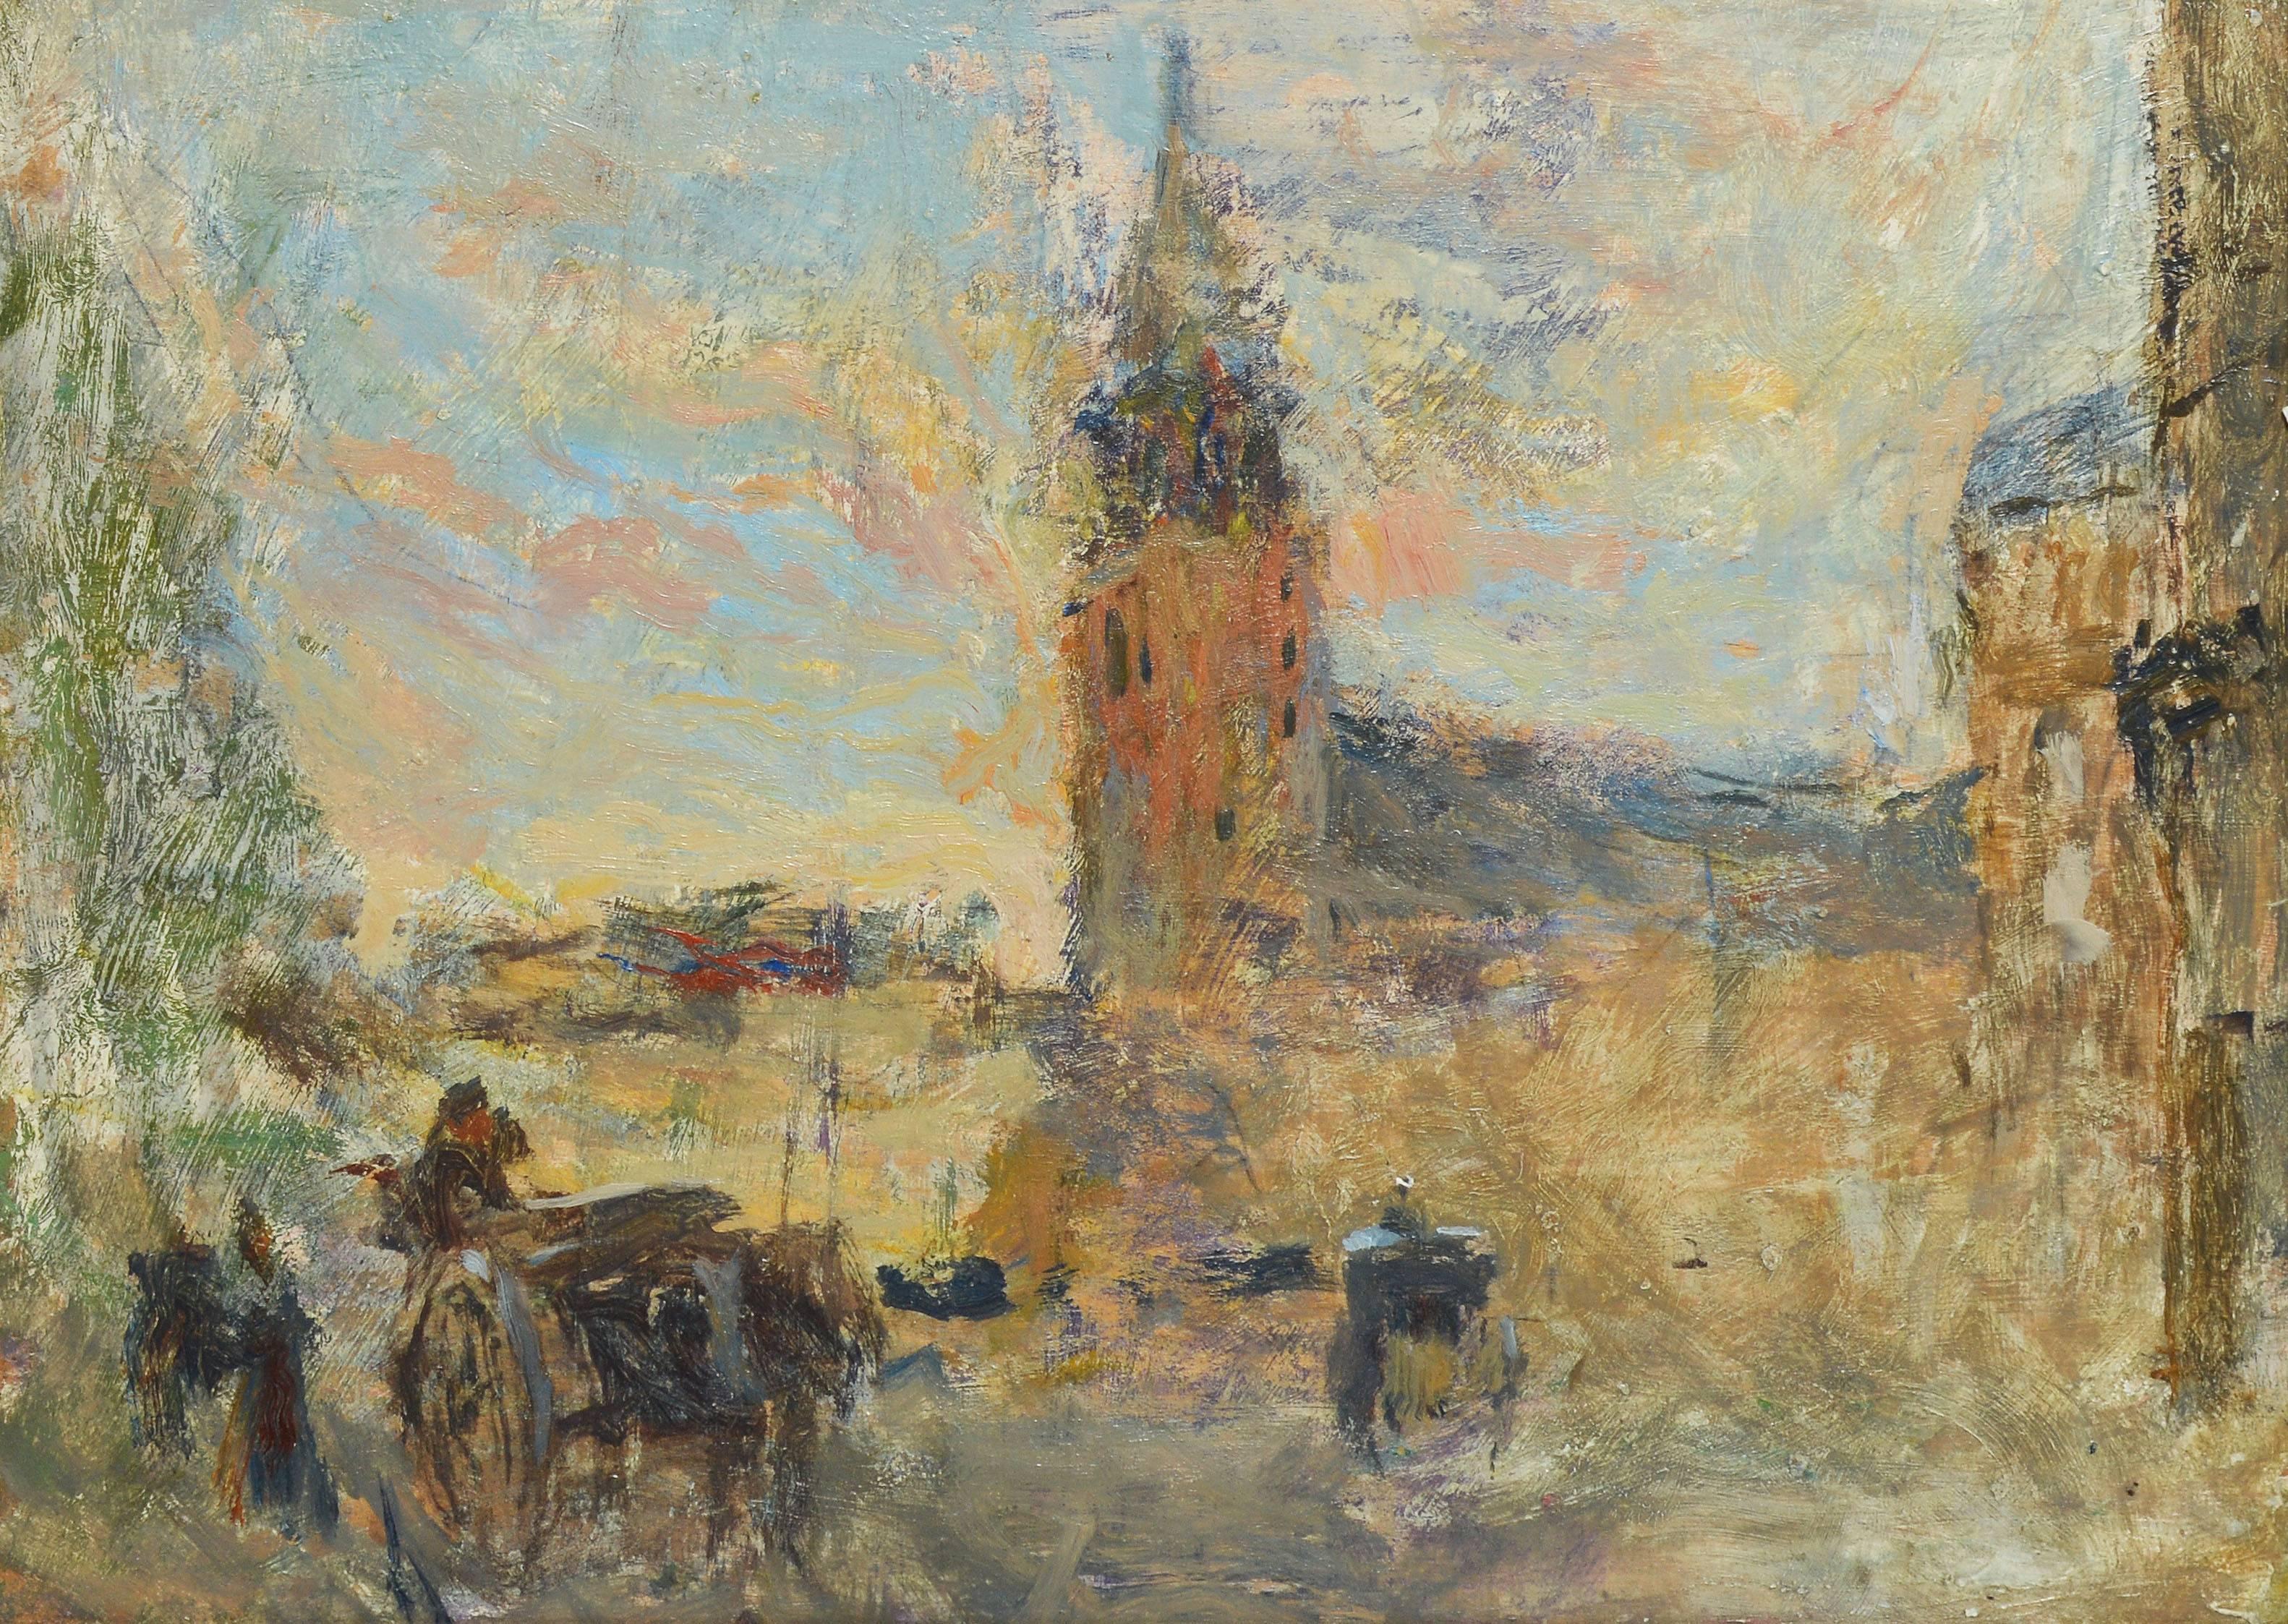 Impressionist cityscape of Paris by Frank Edwin Scott (1863-1929).  Oil on board, circa 1910.  Signed lower left, "Edwin Scott".  Displayed in an impressionist frame.  Image size, 14"L x 10.5"H, overall 17"L x 14"H.